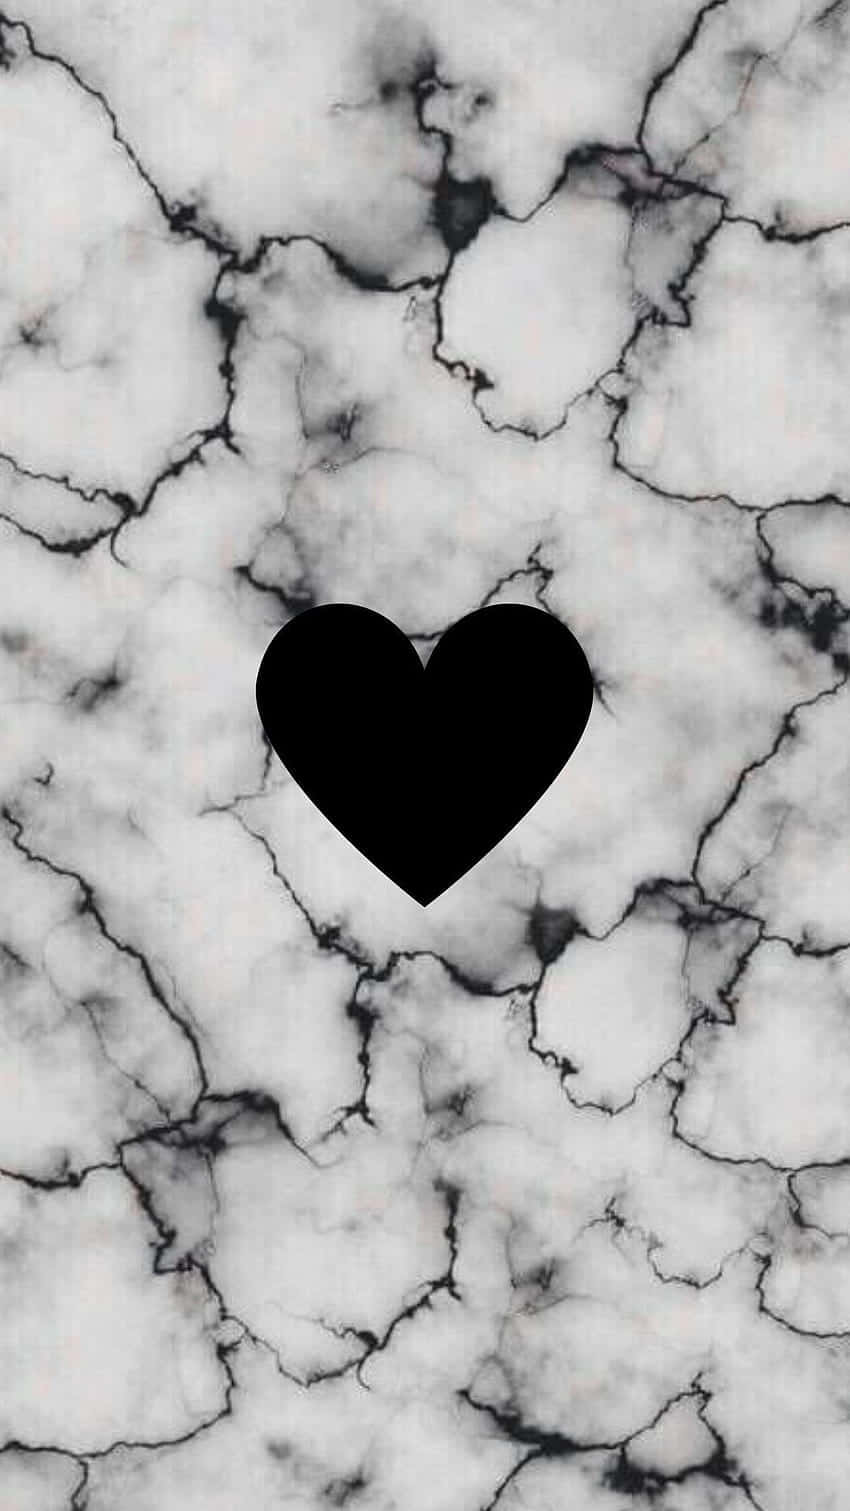 A Black and White Heart on an Artistic Background